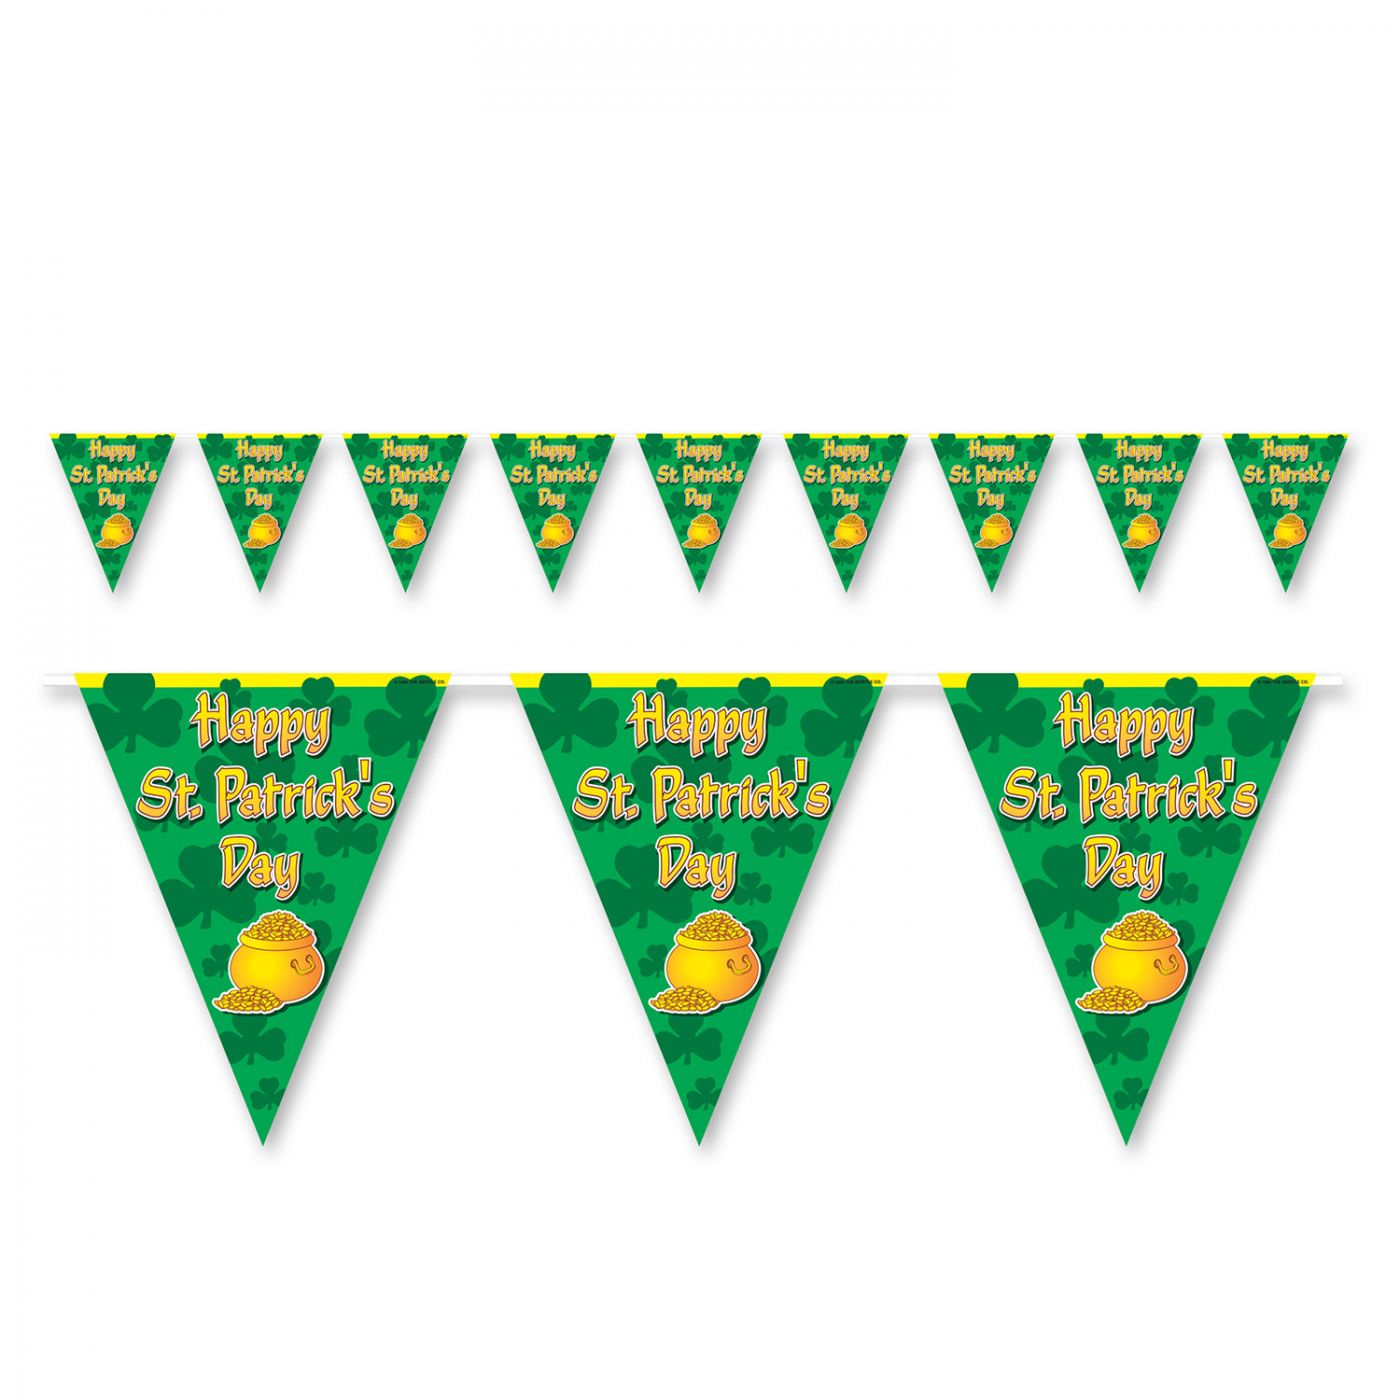 Happy St Patrick's Day Pennant Banner image